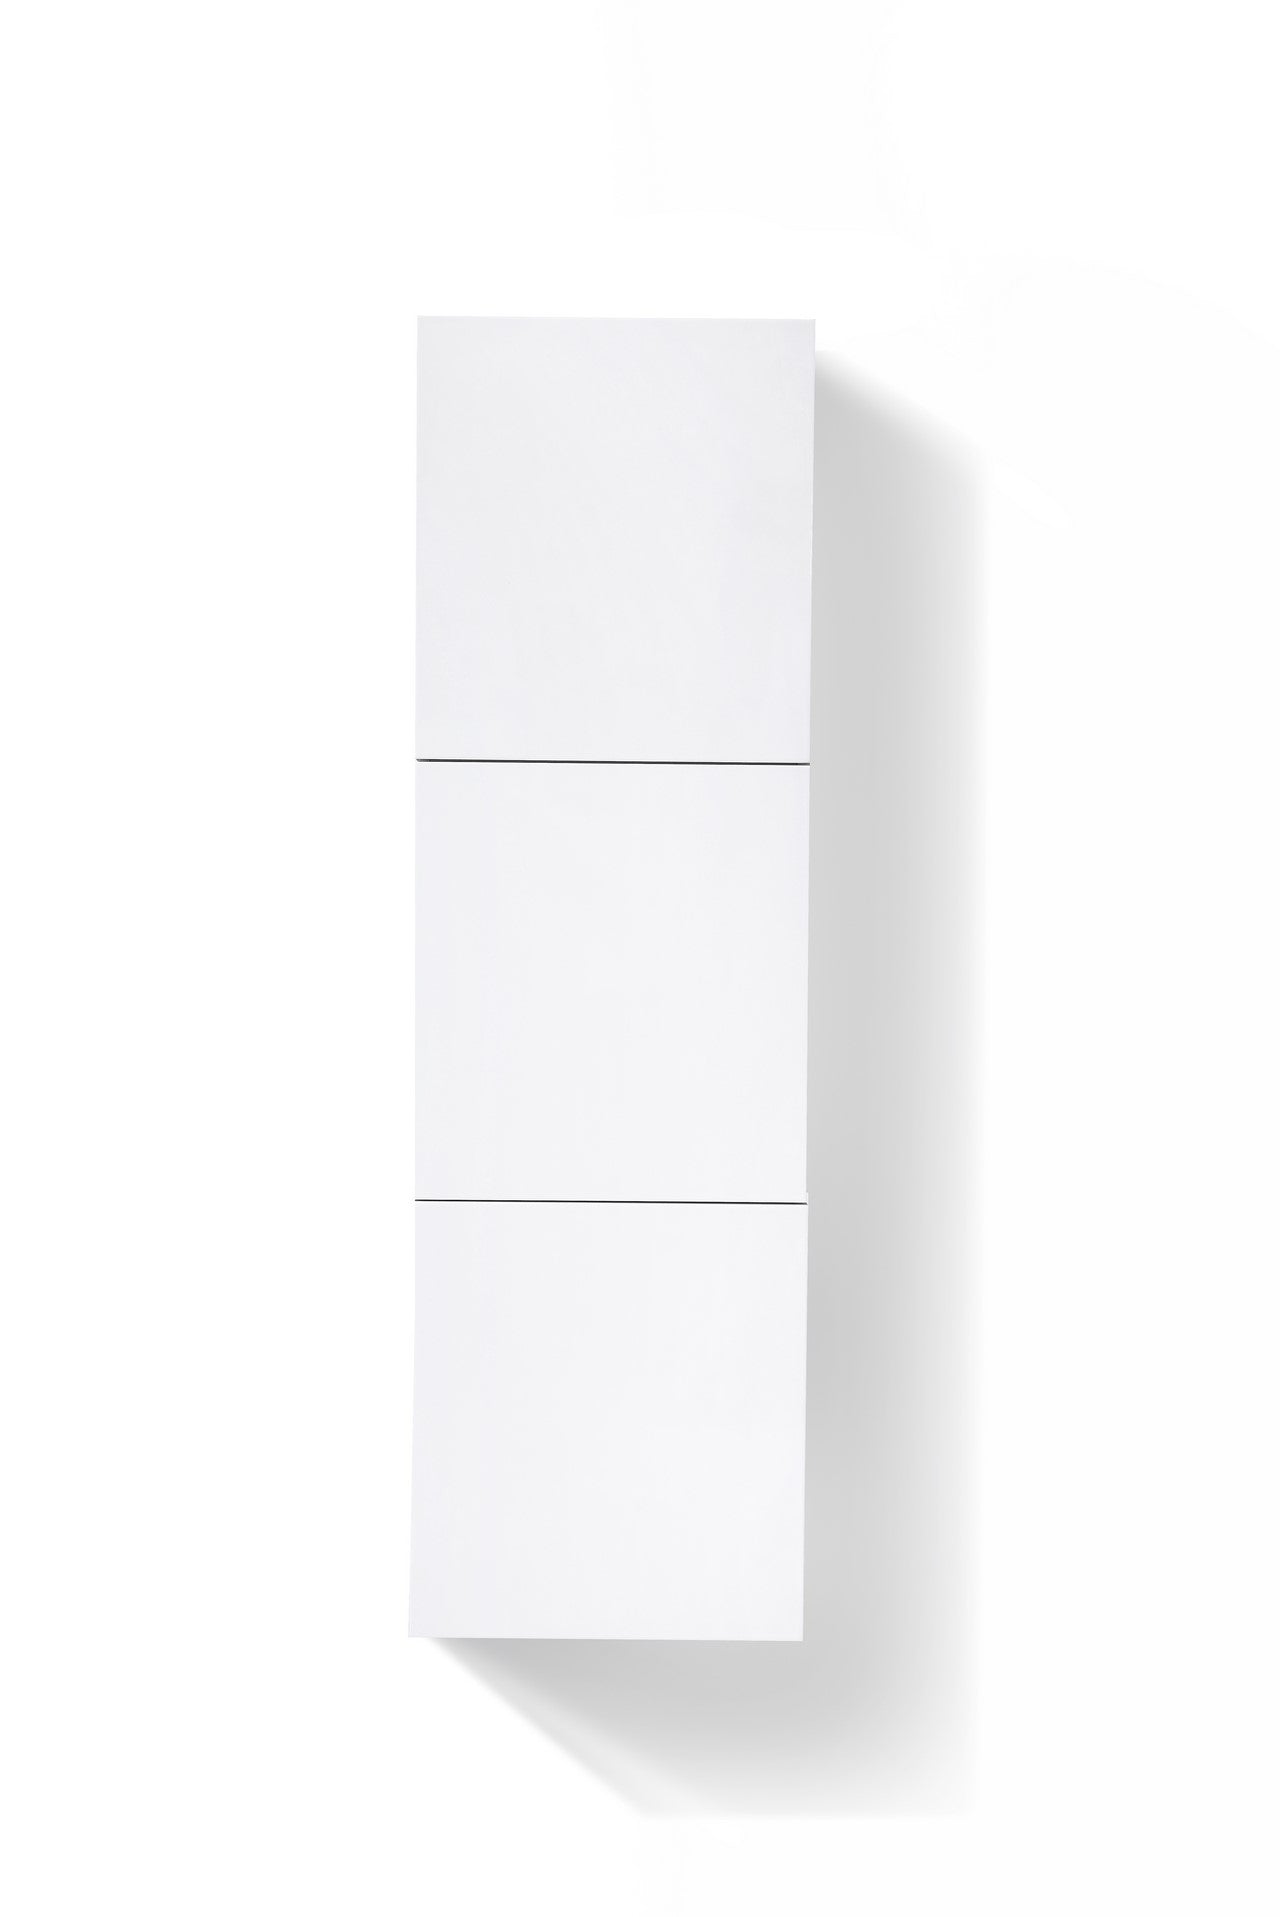 White Gloss White Linen Side Bathroom Cabinet w/ 3 Large Storage Areas